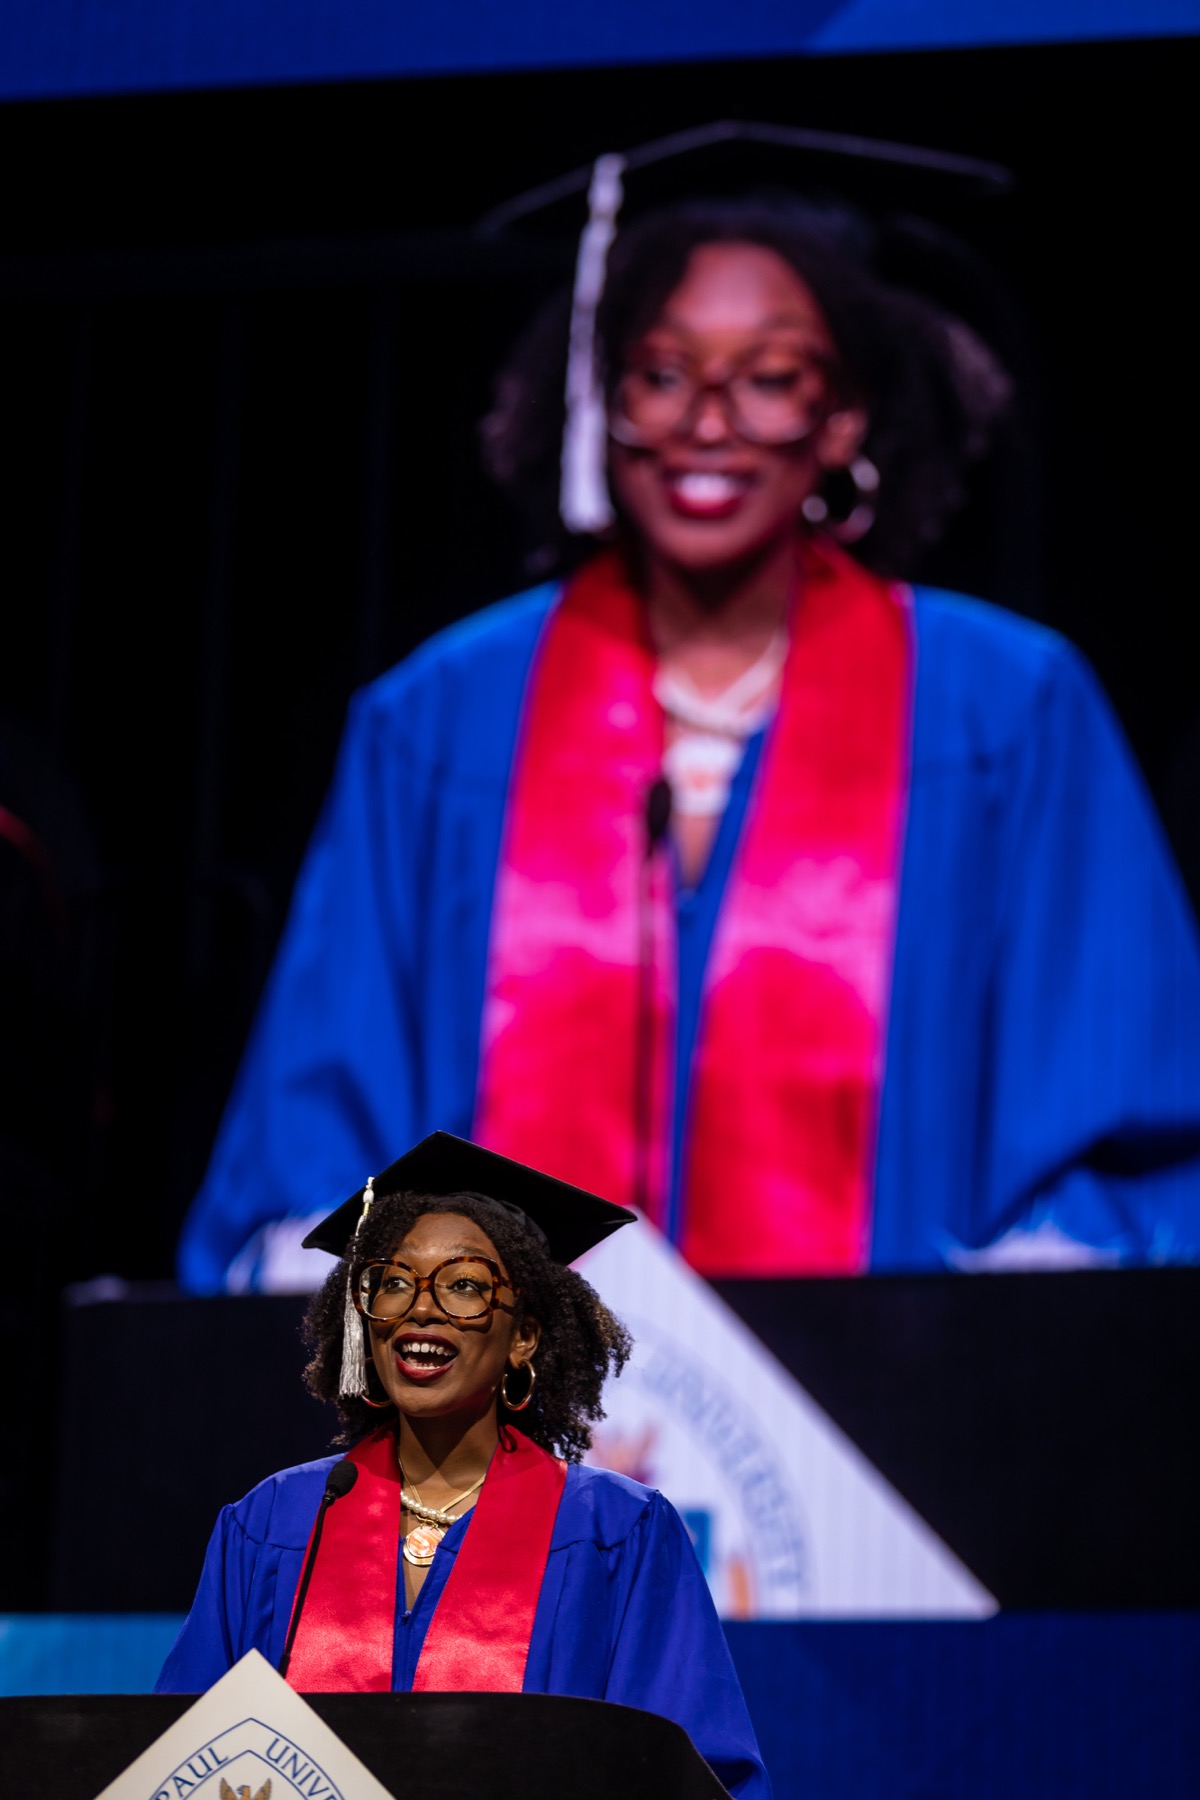 Victoria Hall shared some of the lessons learned during her student address.